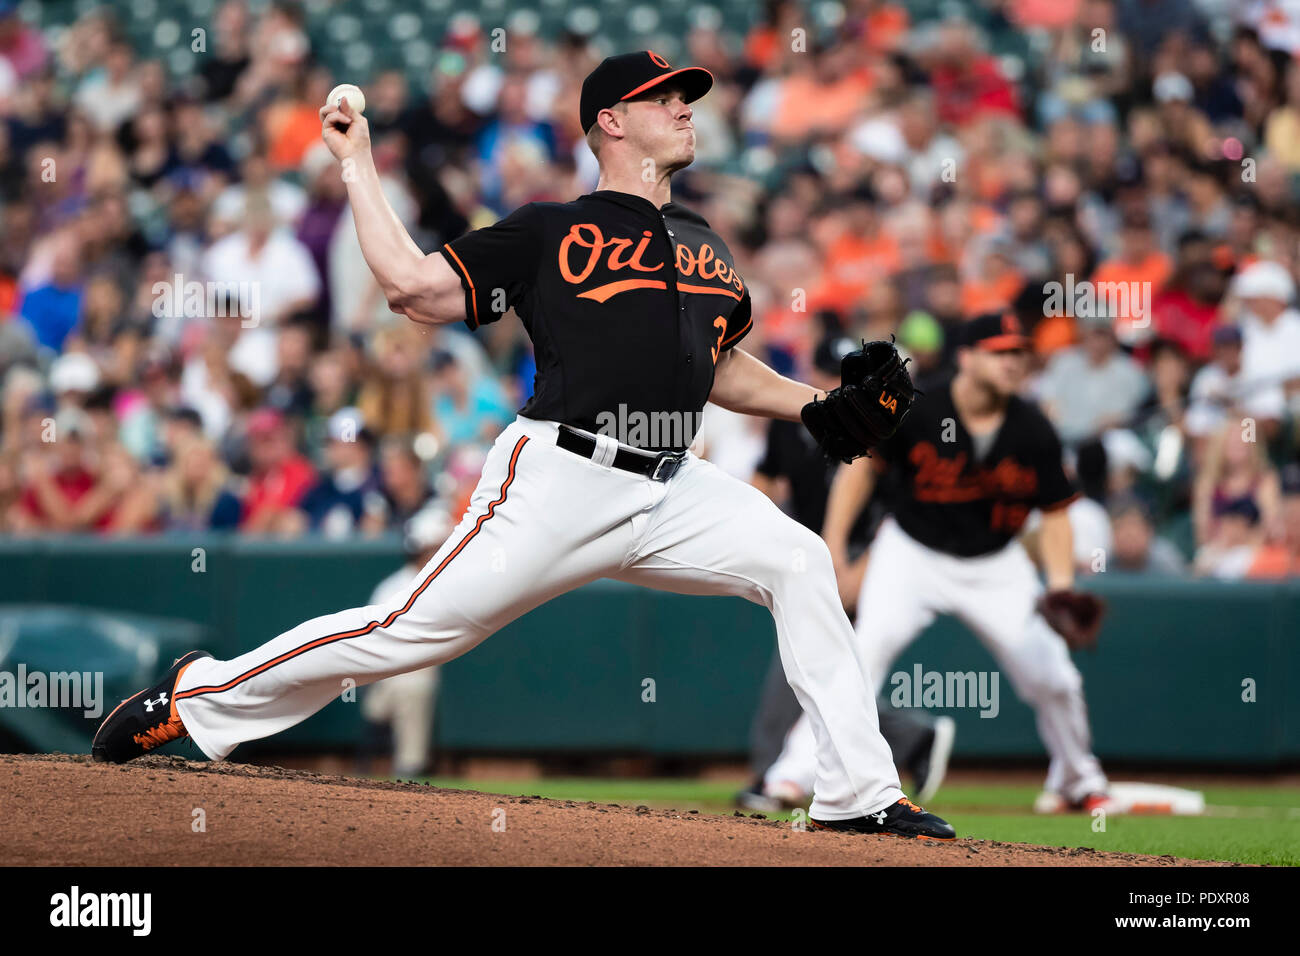 August 10, 2018: Baltimore Orioles starting pitcher Dylan Bundy (37) pitches during the second inning of the MLB game between the Boston Red Sox and the Baltimore Orioles at Oriole Park at Camden Yards in Baltimore, Maryland. Scott Taetsch/CSM Stock Photo